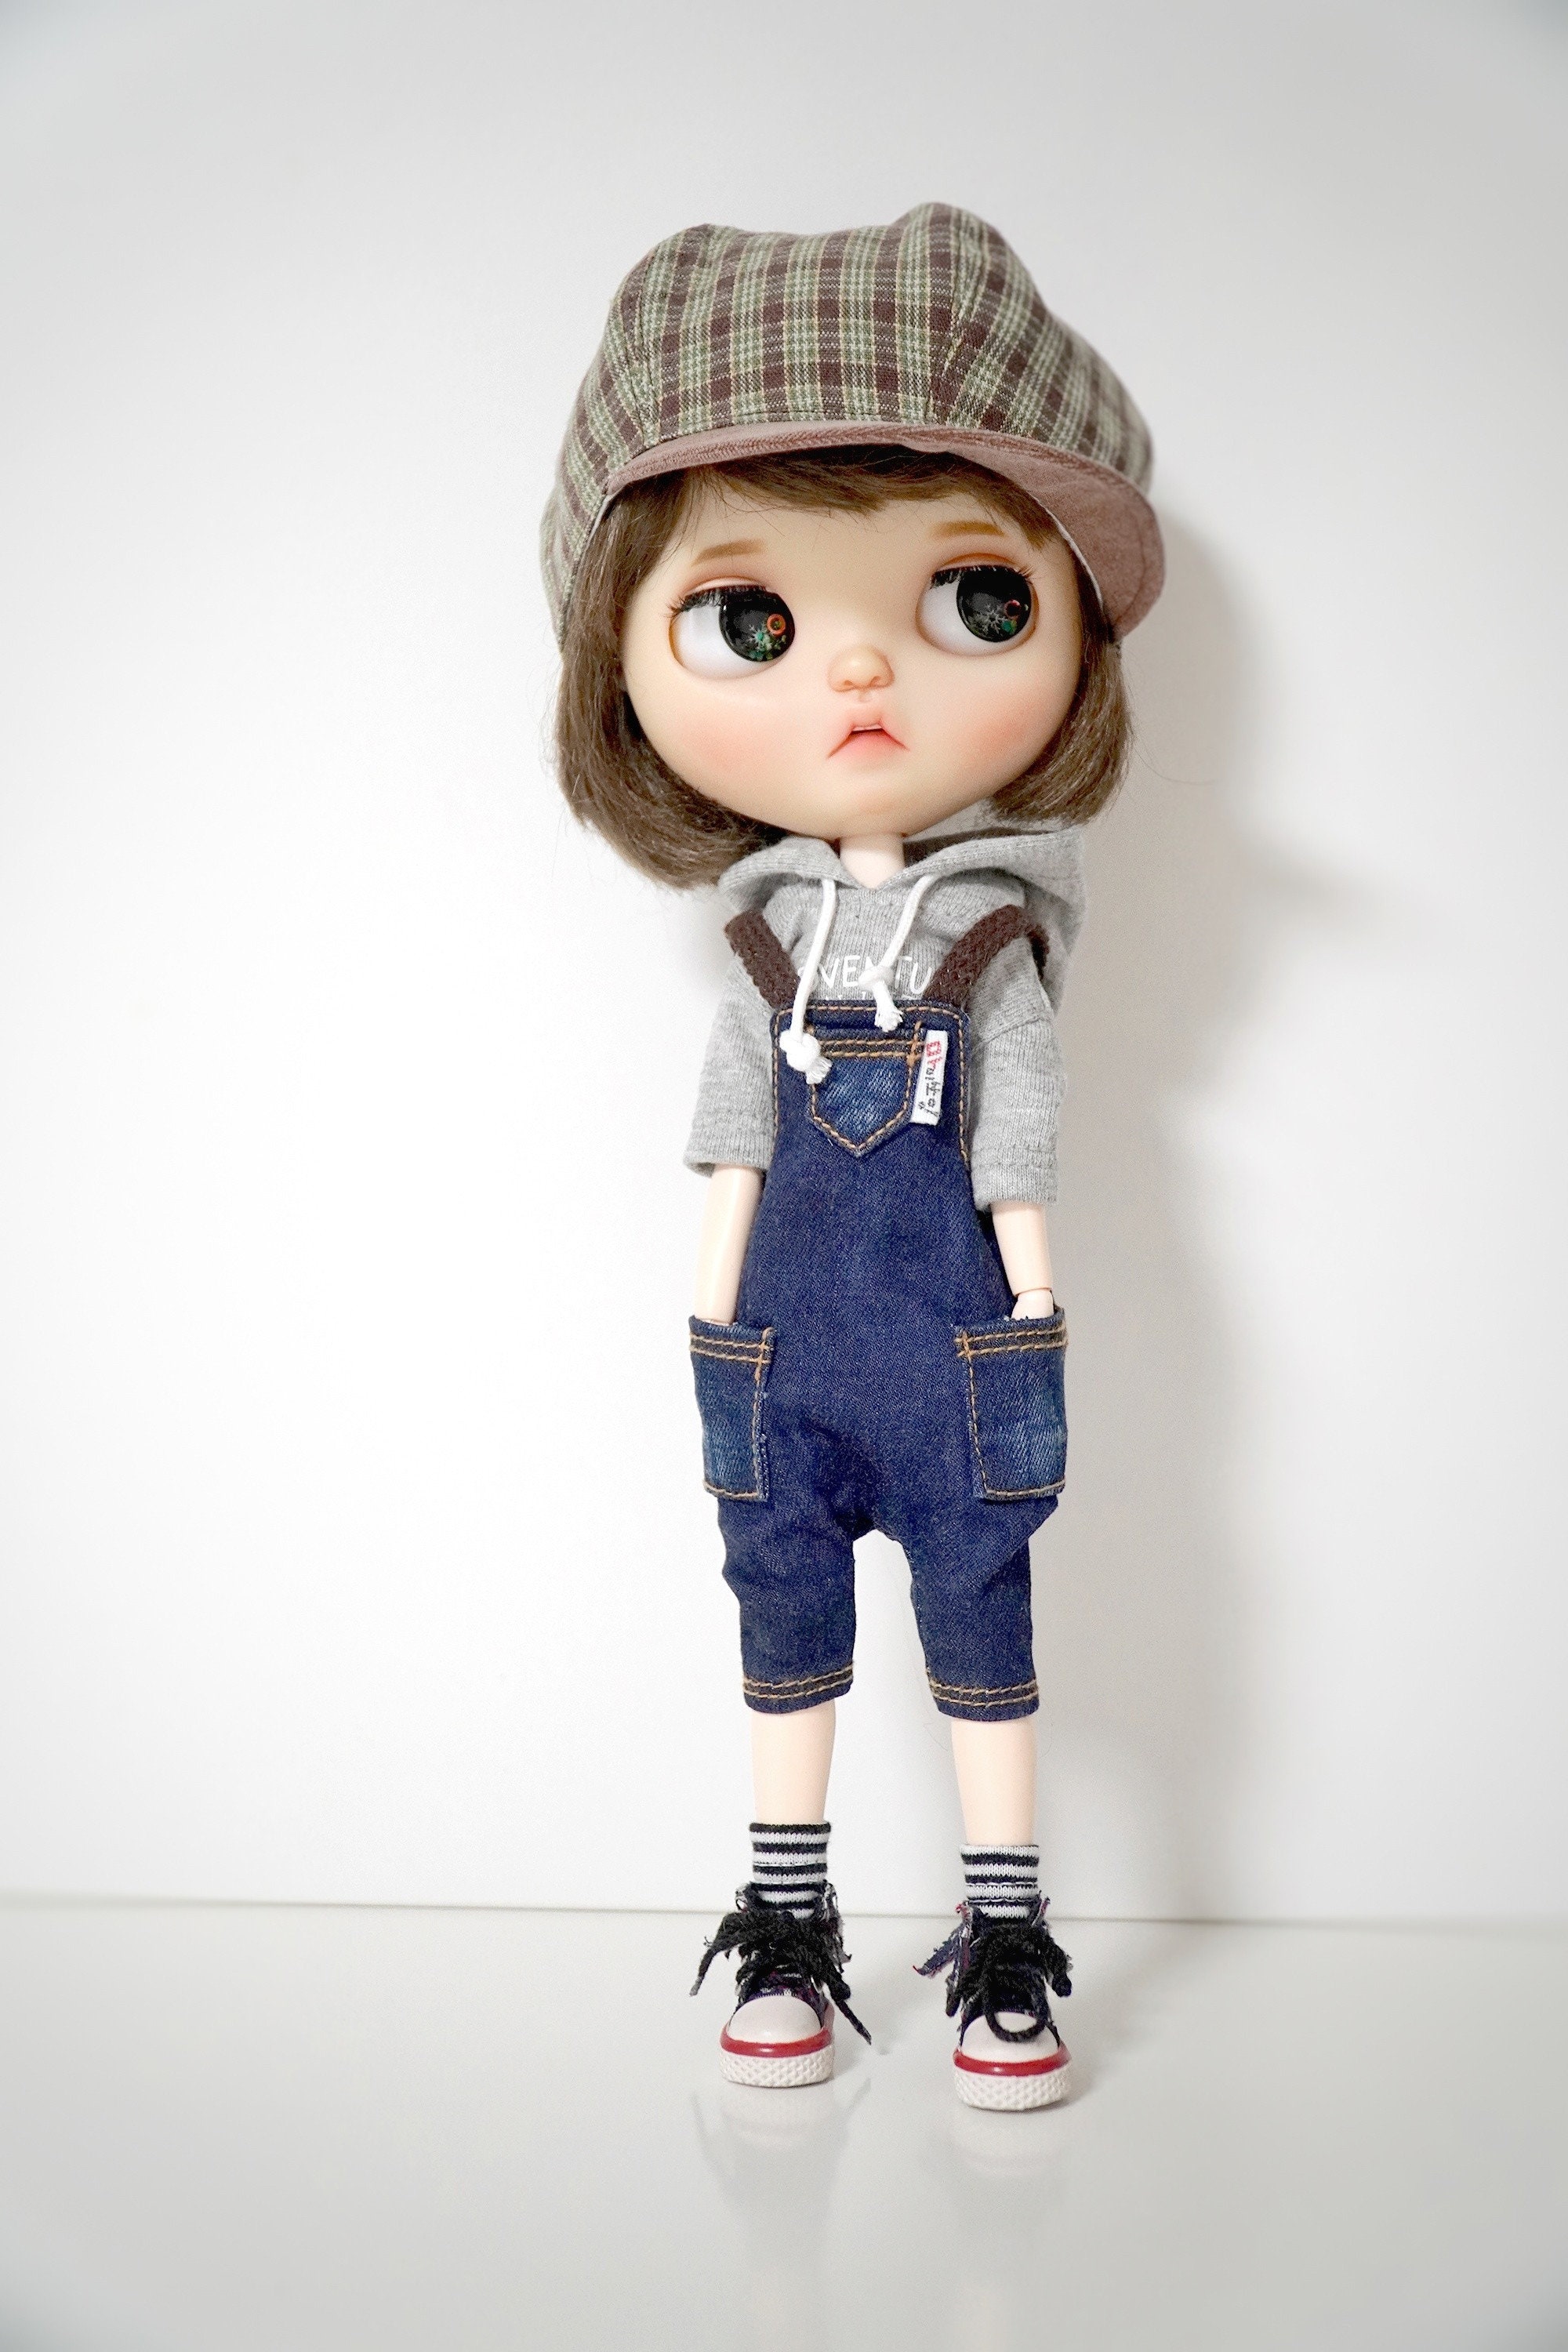 Blythe Pullip doll Clothes Adventure Gray Hoodie T-shirt | Etsy